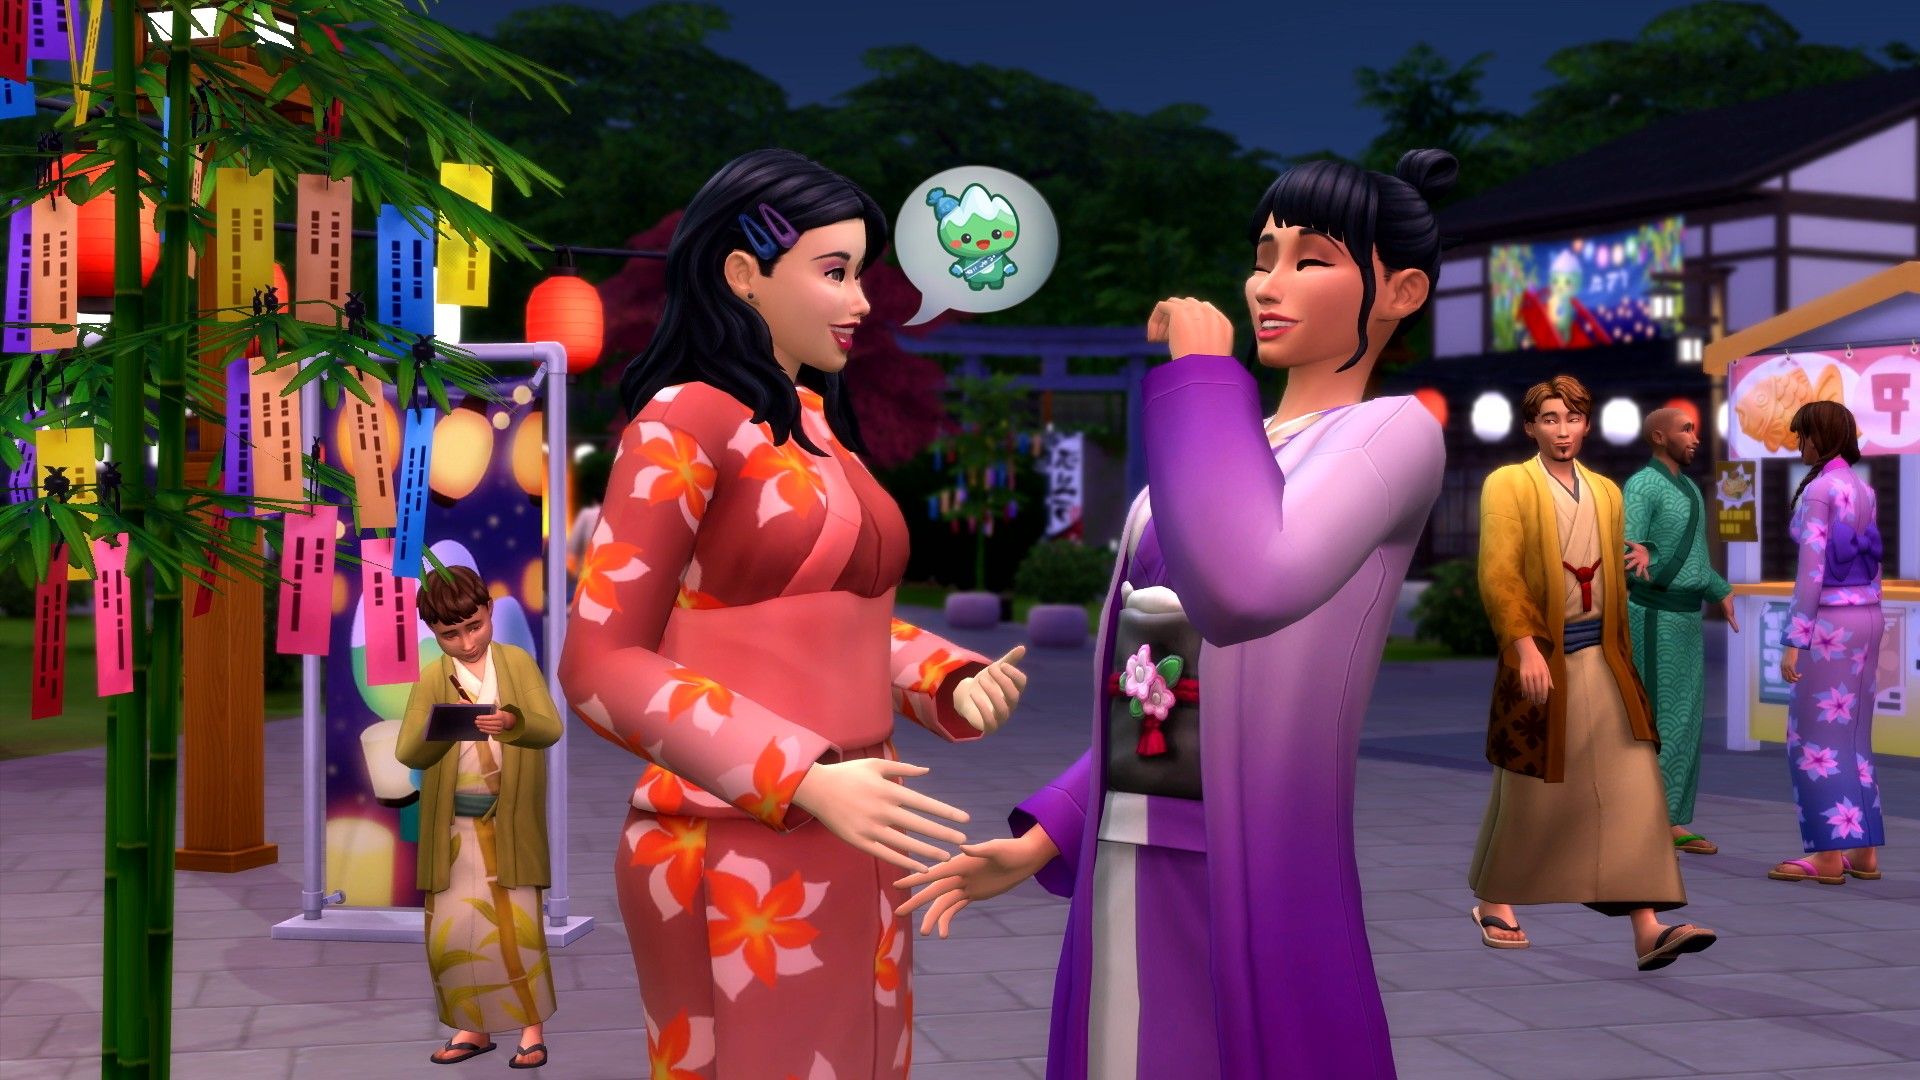 Two female Sims wear traditional Japanese clothing and converse at a festival in The Sims 4: Snowy Escape